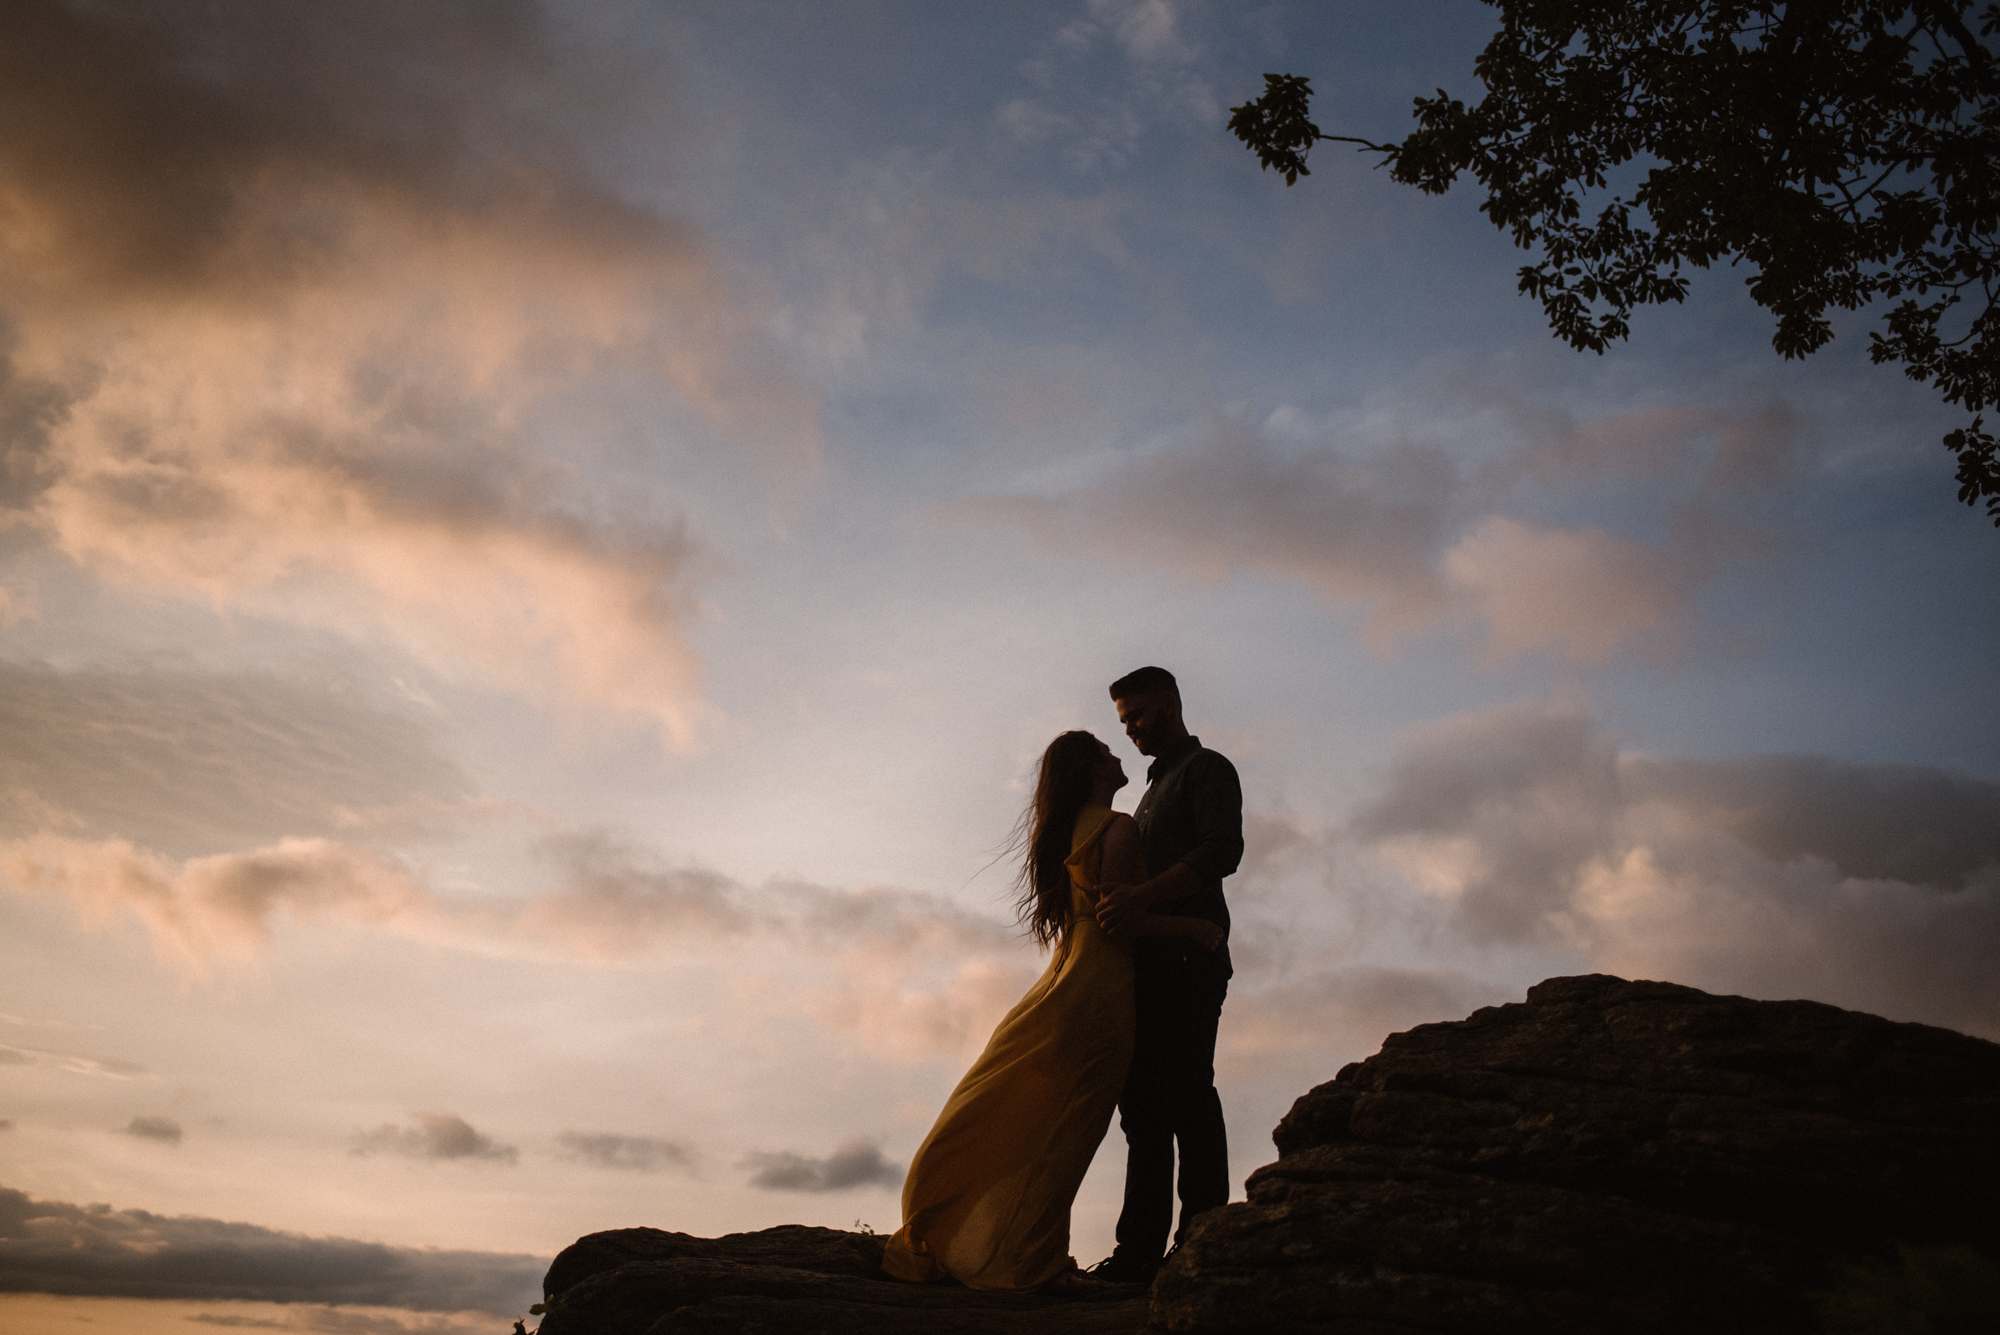 Camryn and Larry Sunrise Engagement Session in Shenandoah National Park - Things to Do in Luray Virginia - Adventurous Couple Photo Shoot White Sails Creative_10.jpg